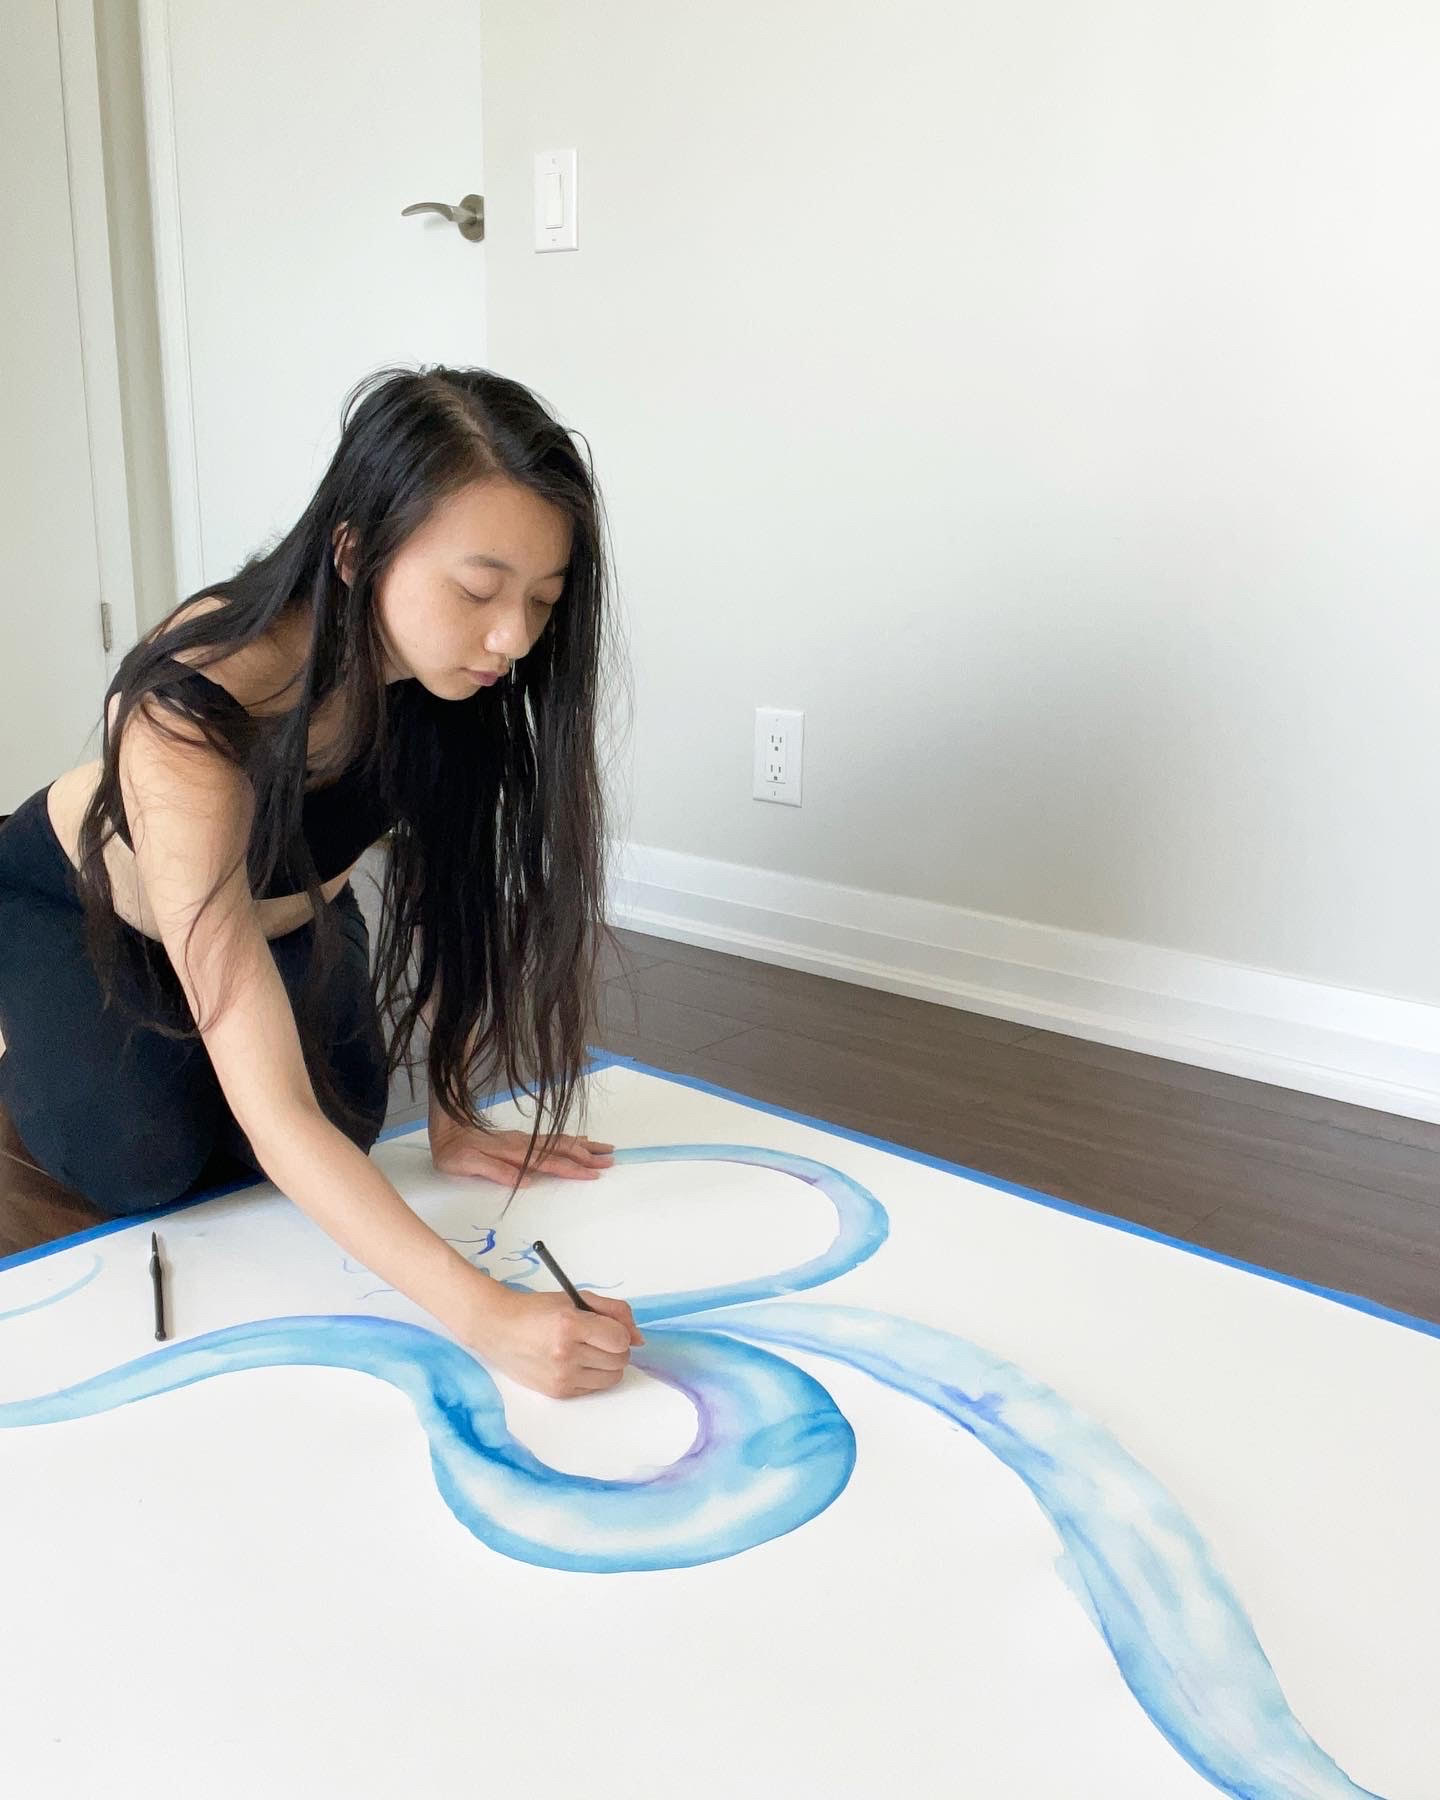 A woman (Jenny) paints in blue watercolour on a canvas on a wooden floor.